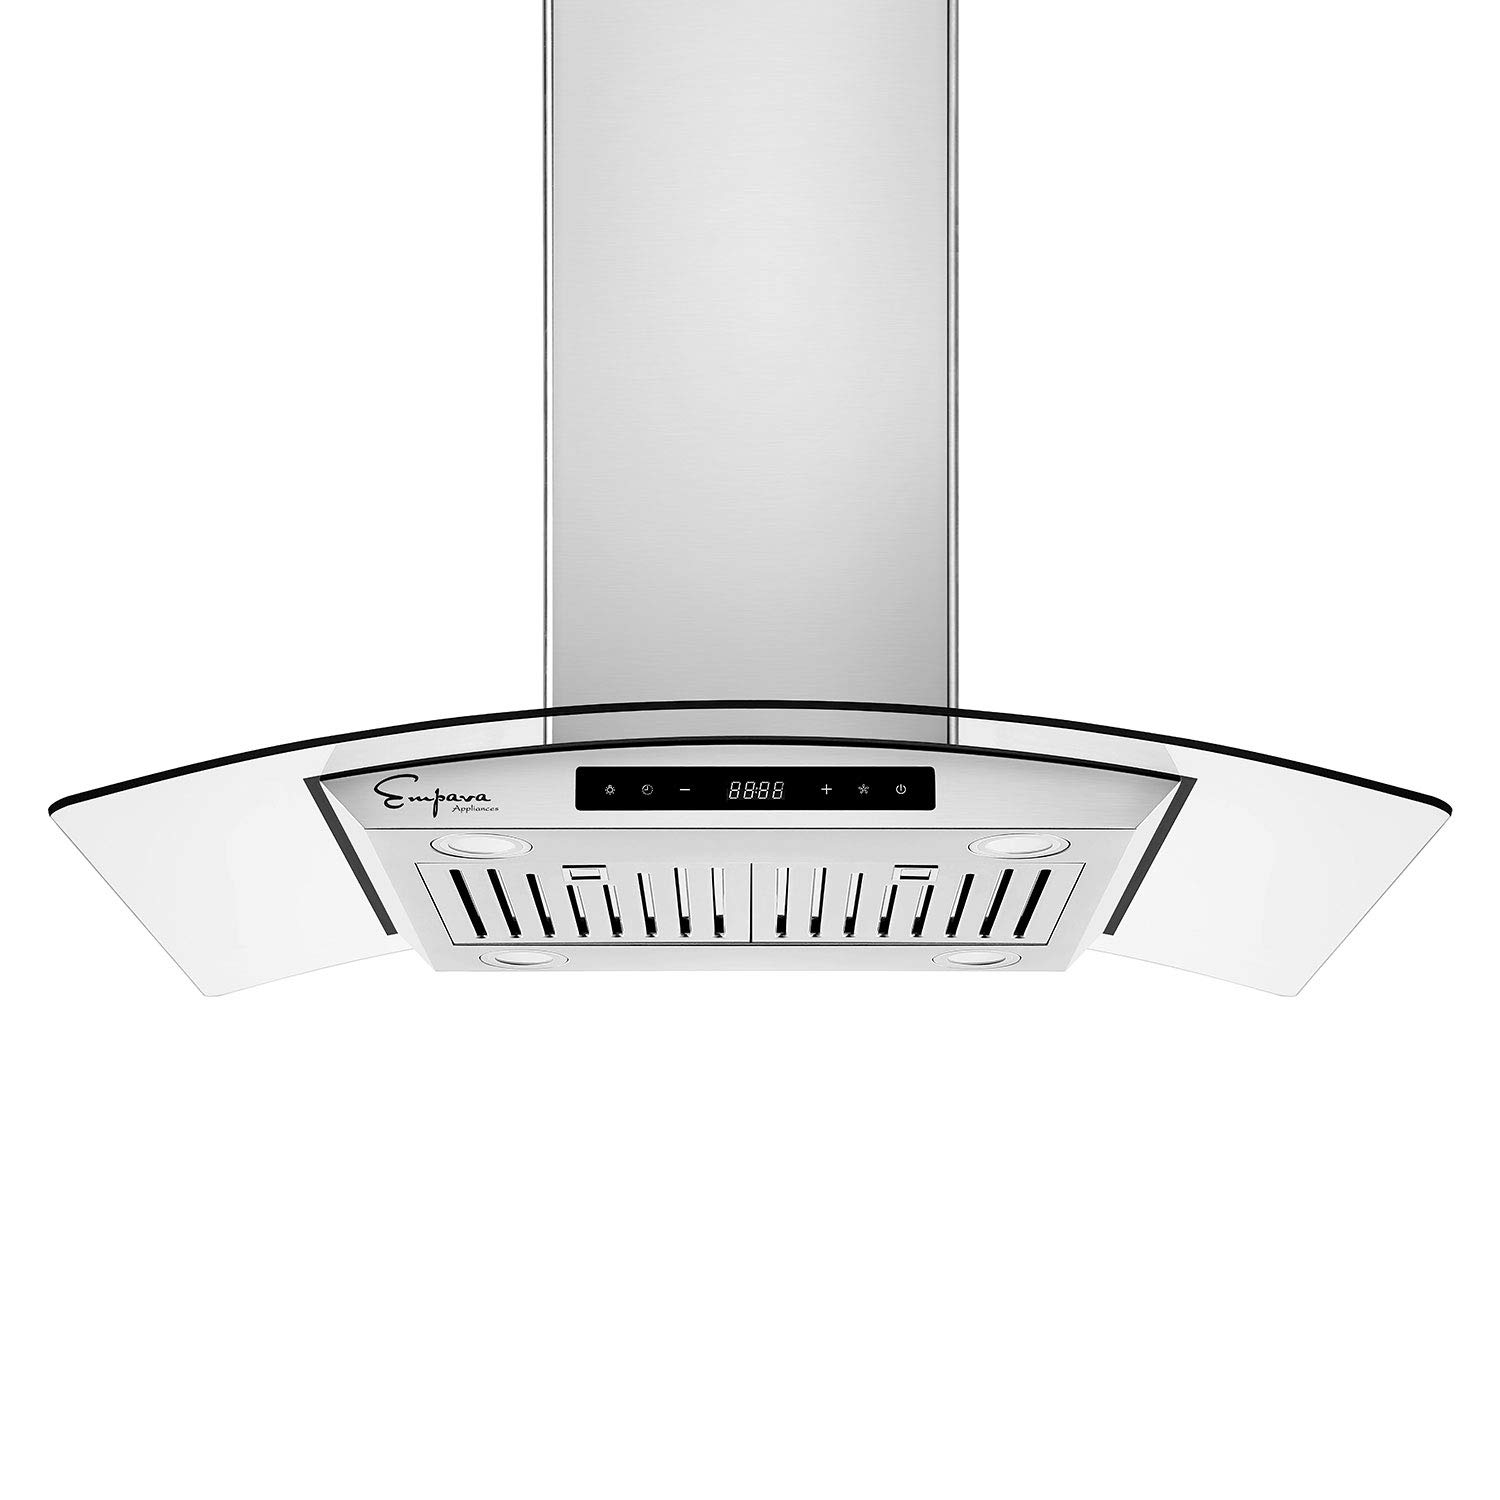 Empava 36 500 cFM Island Range Hood Ducted Exhaust Kitchen Vent-Tempered glass-Soft Touch controls-3 Speed Fan-Permanent Filter 